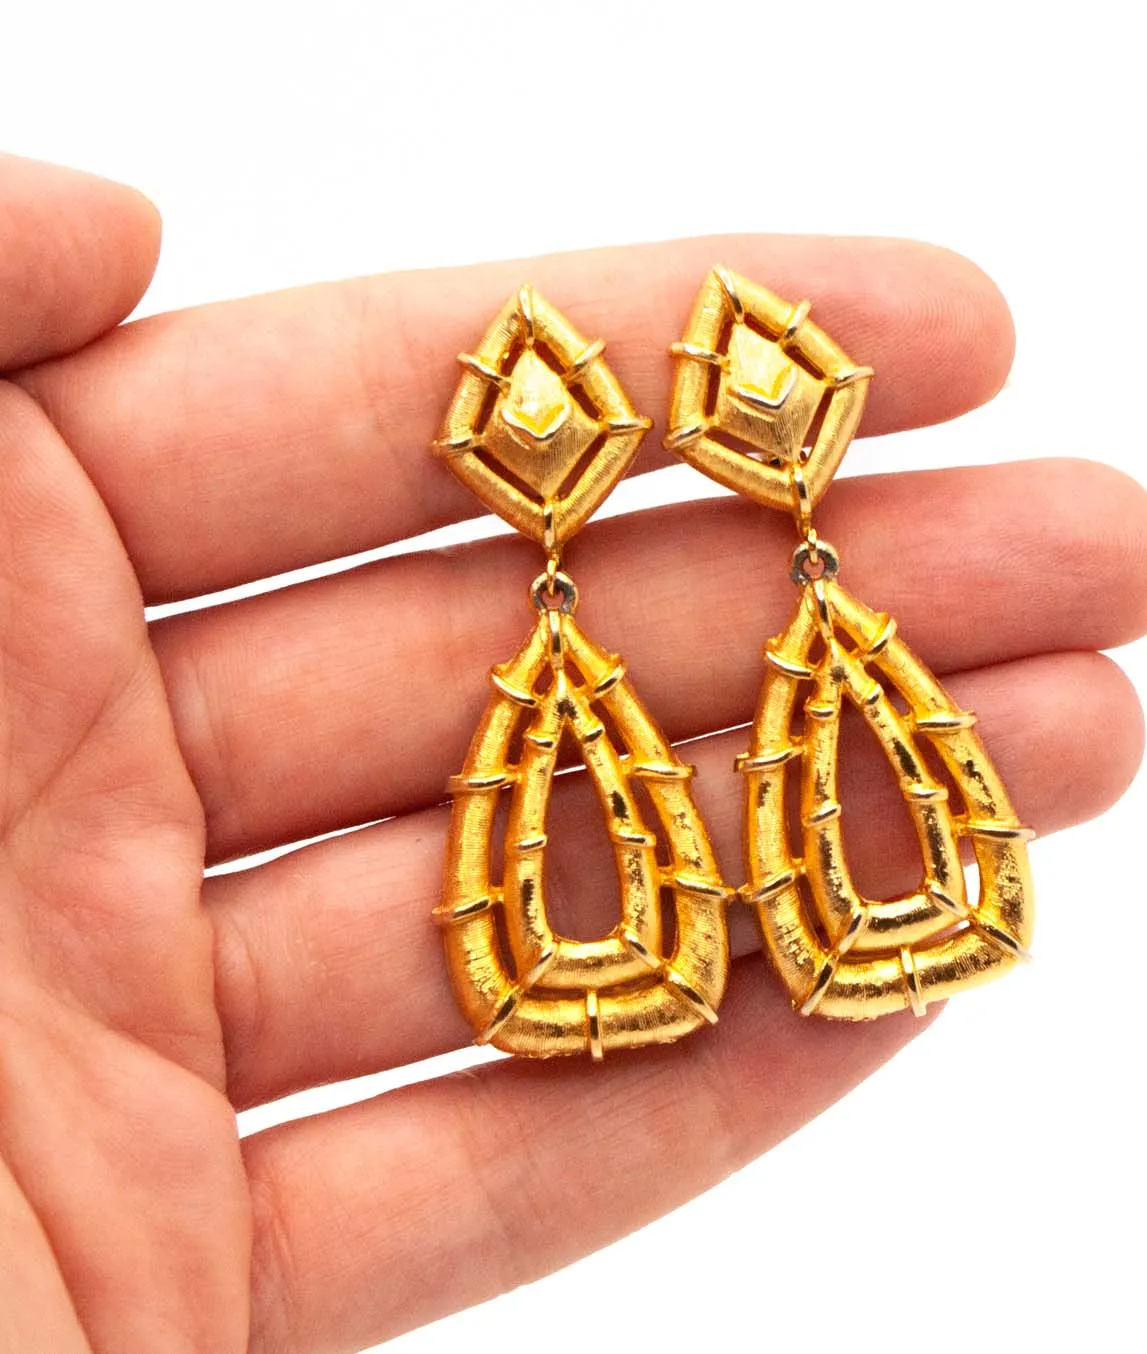 Gold bamboo clip earrings by Polcini in a hand